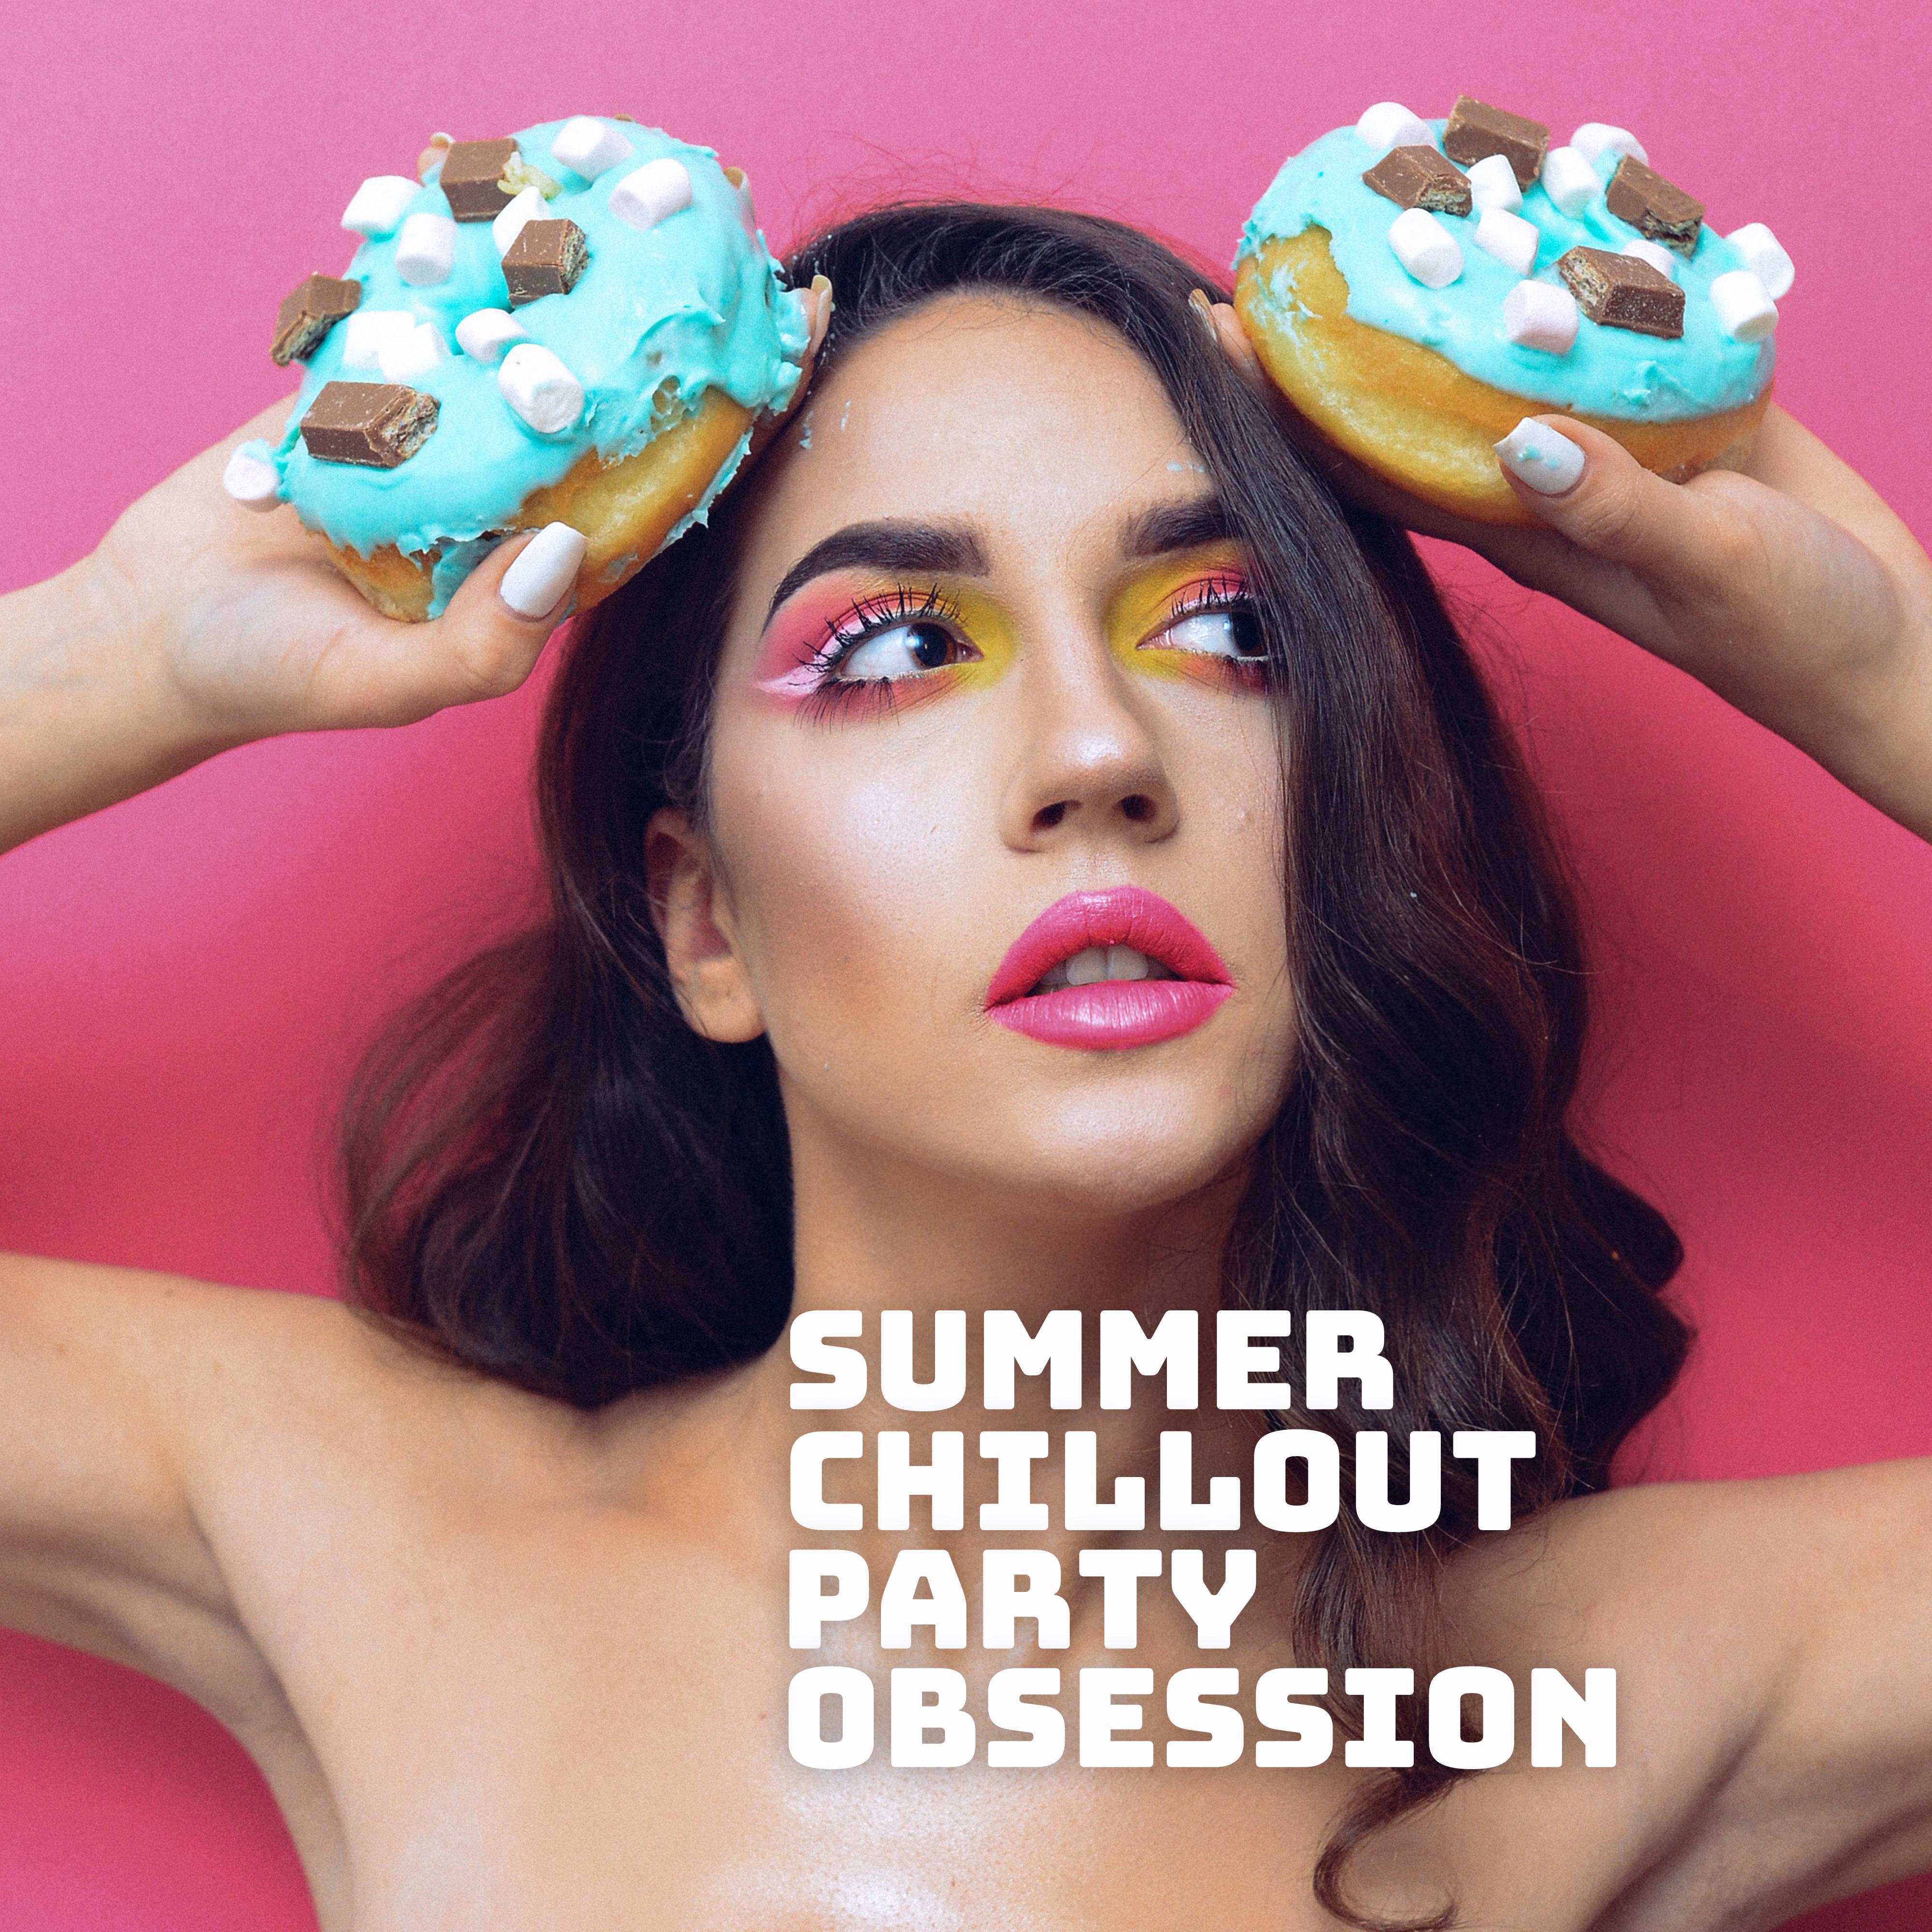 Summer Chillout Party Obsession: Best 2019 Chill Out Deep Music for Dance Party, Low BPM Beats, Hot Summer Vacation Vibes, Tropical Chill Melodies